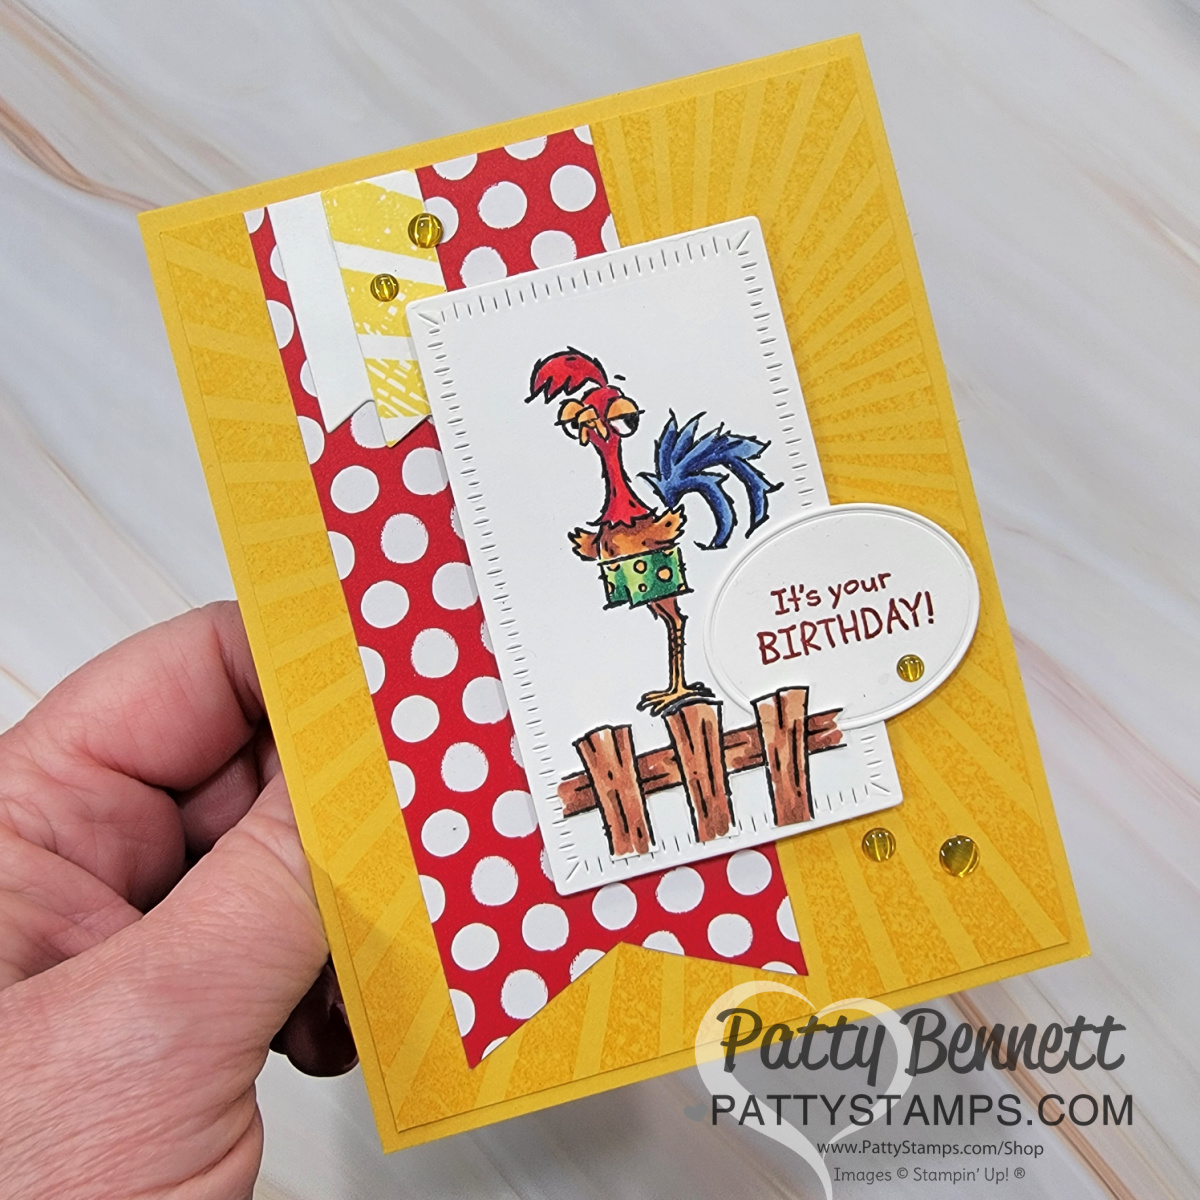 Challenge Card Featuring November Stamp of the Month - Stamp with